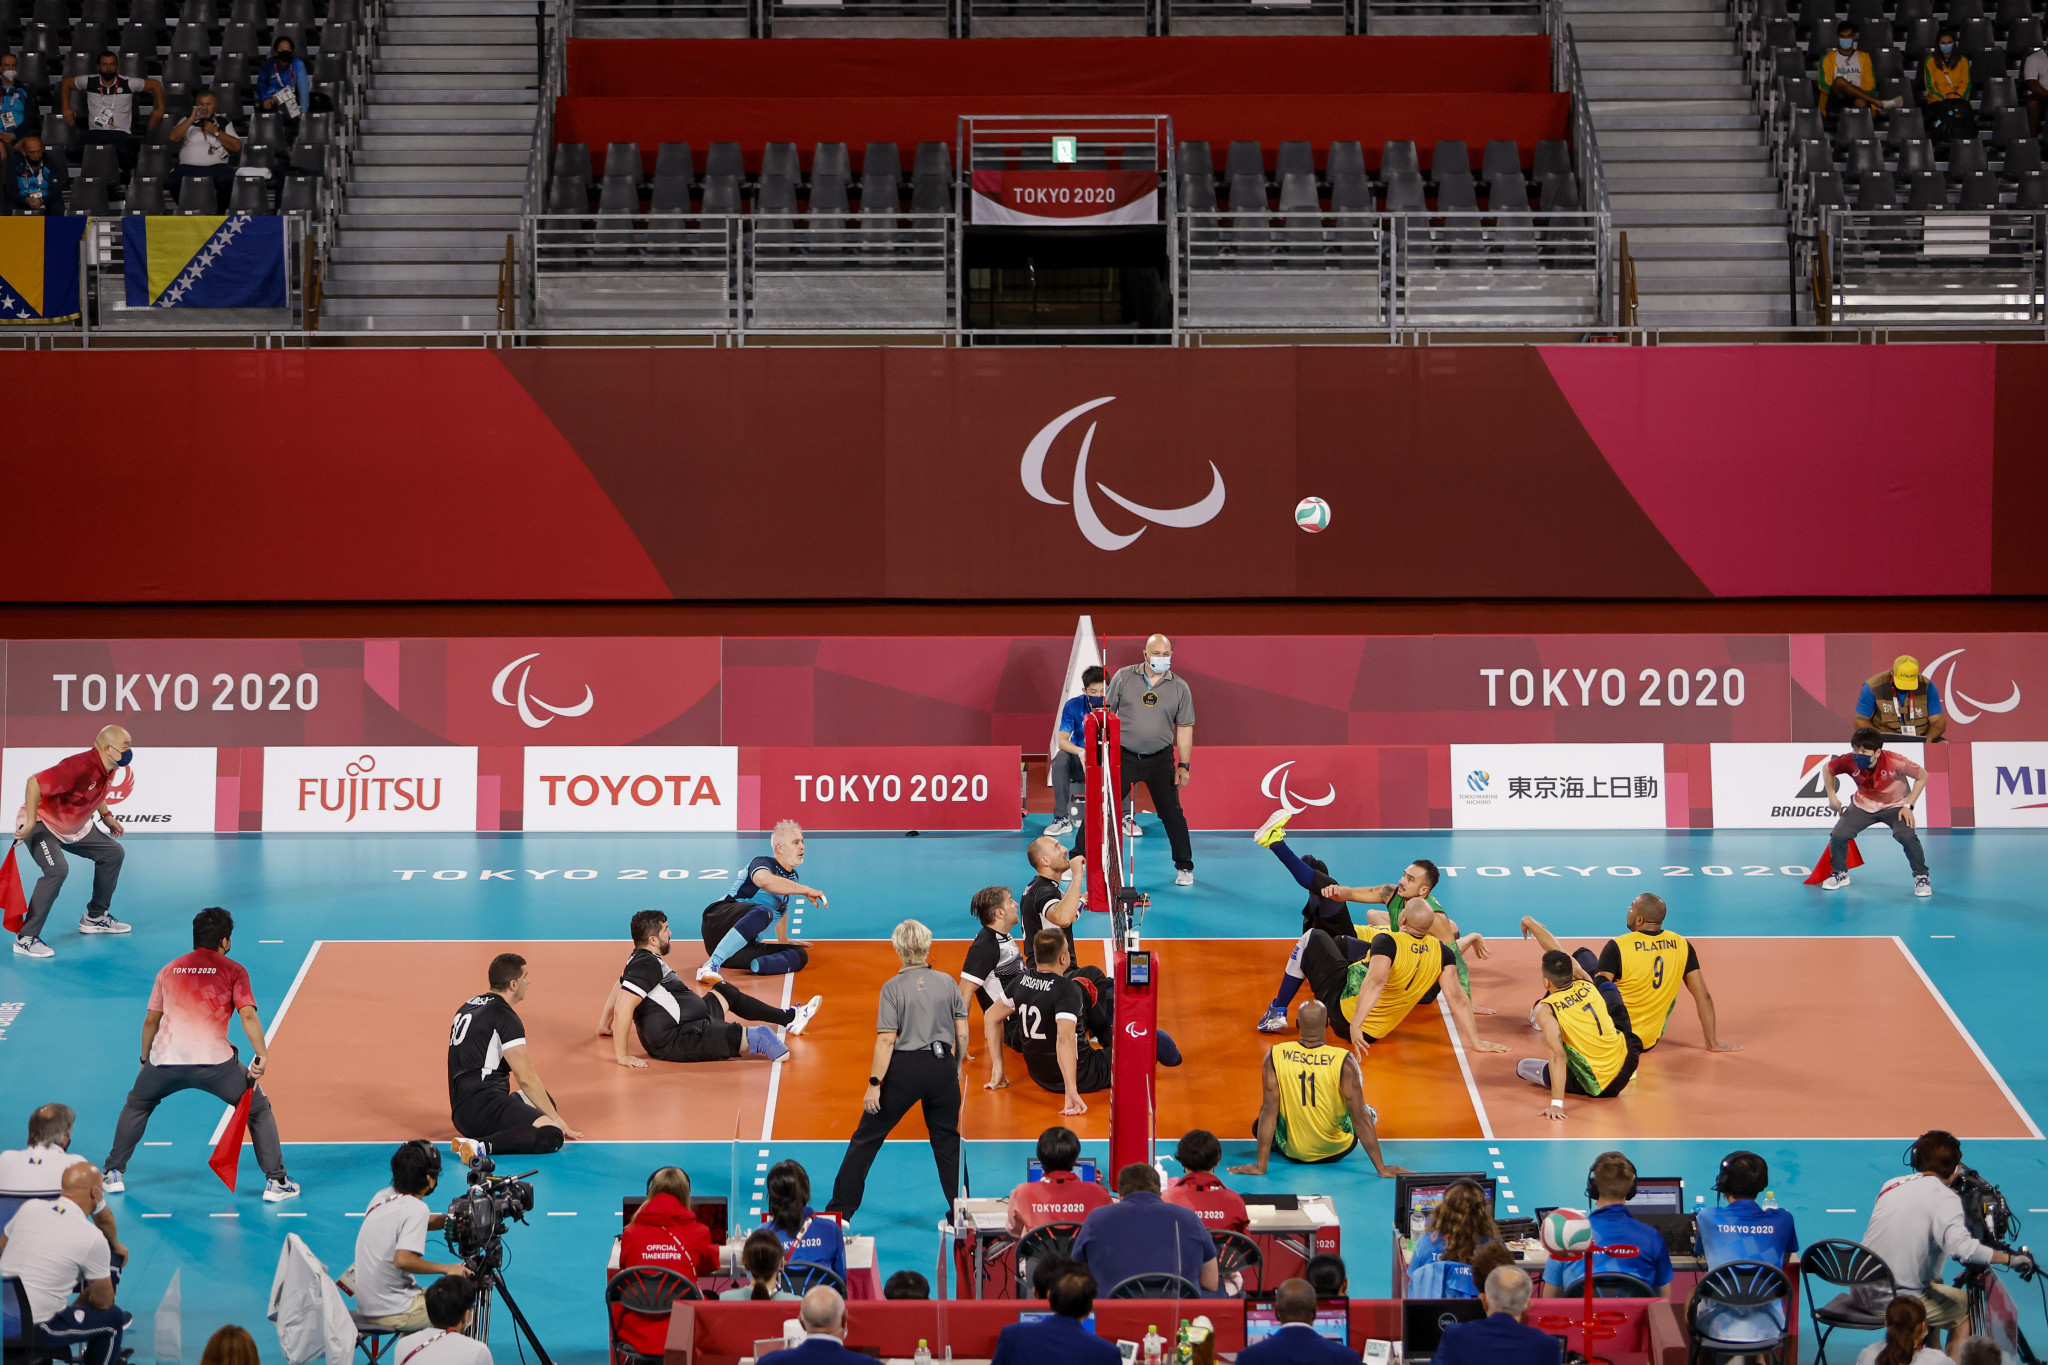 Bosnia and Herzegovina and Italy qualify for Paris 2024 after winning European Sitting Volleyball Championship titles